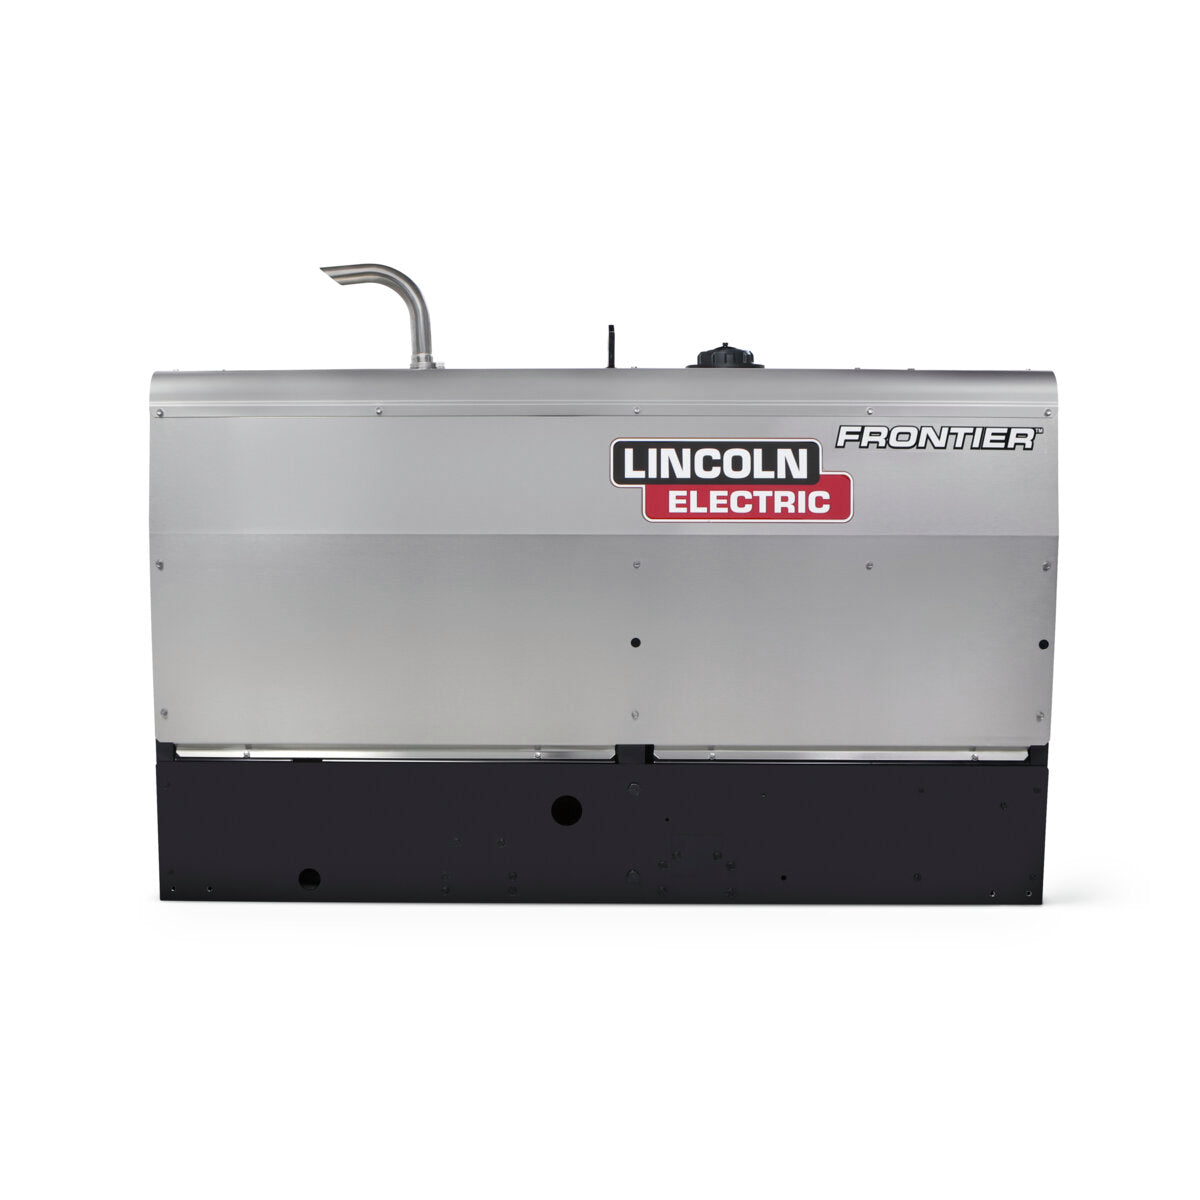 Lincoln Electric - Frontier® 400X (Perkins®) Ready-Pak® 2 - K3484-1-RP2